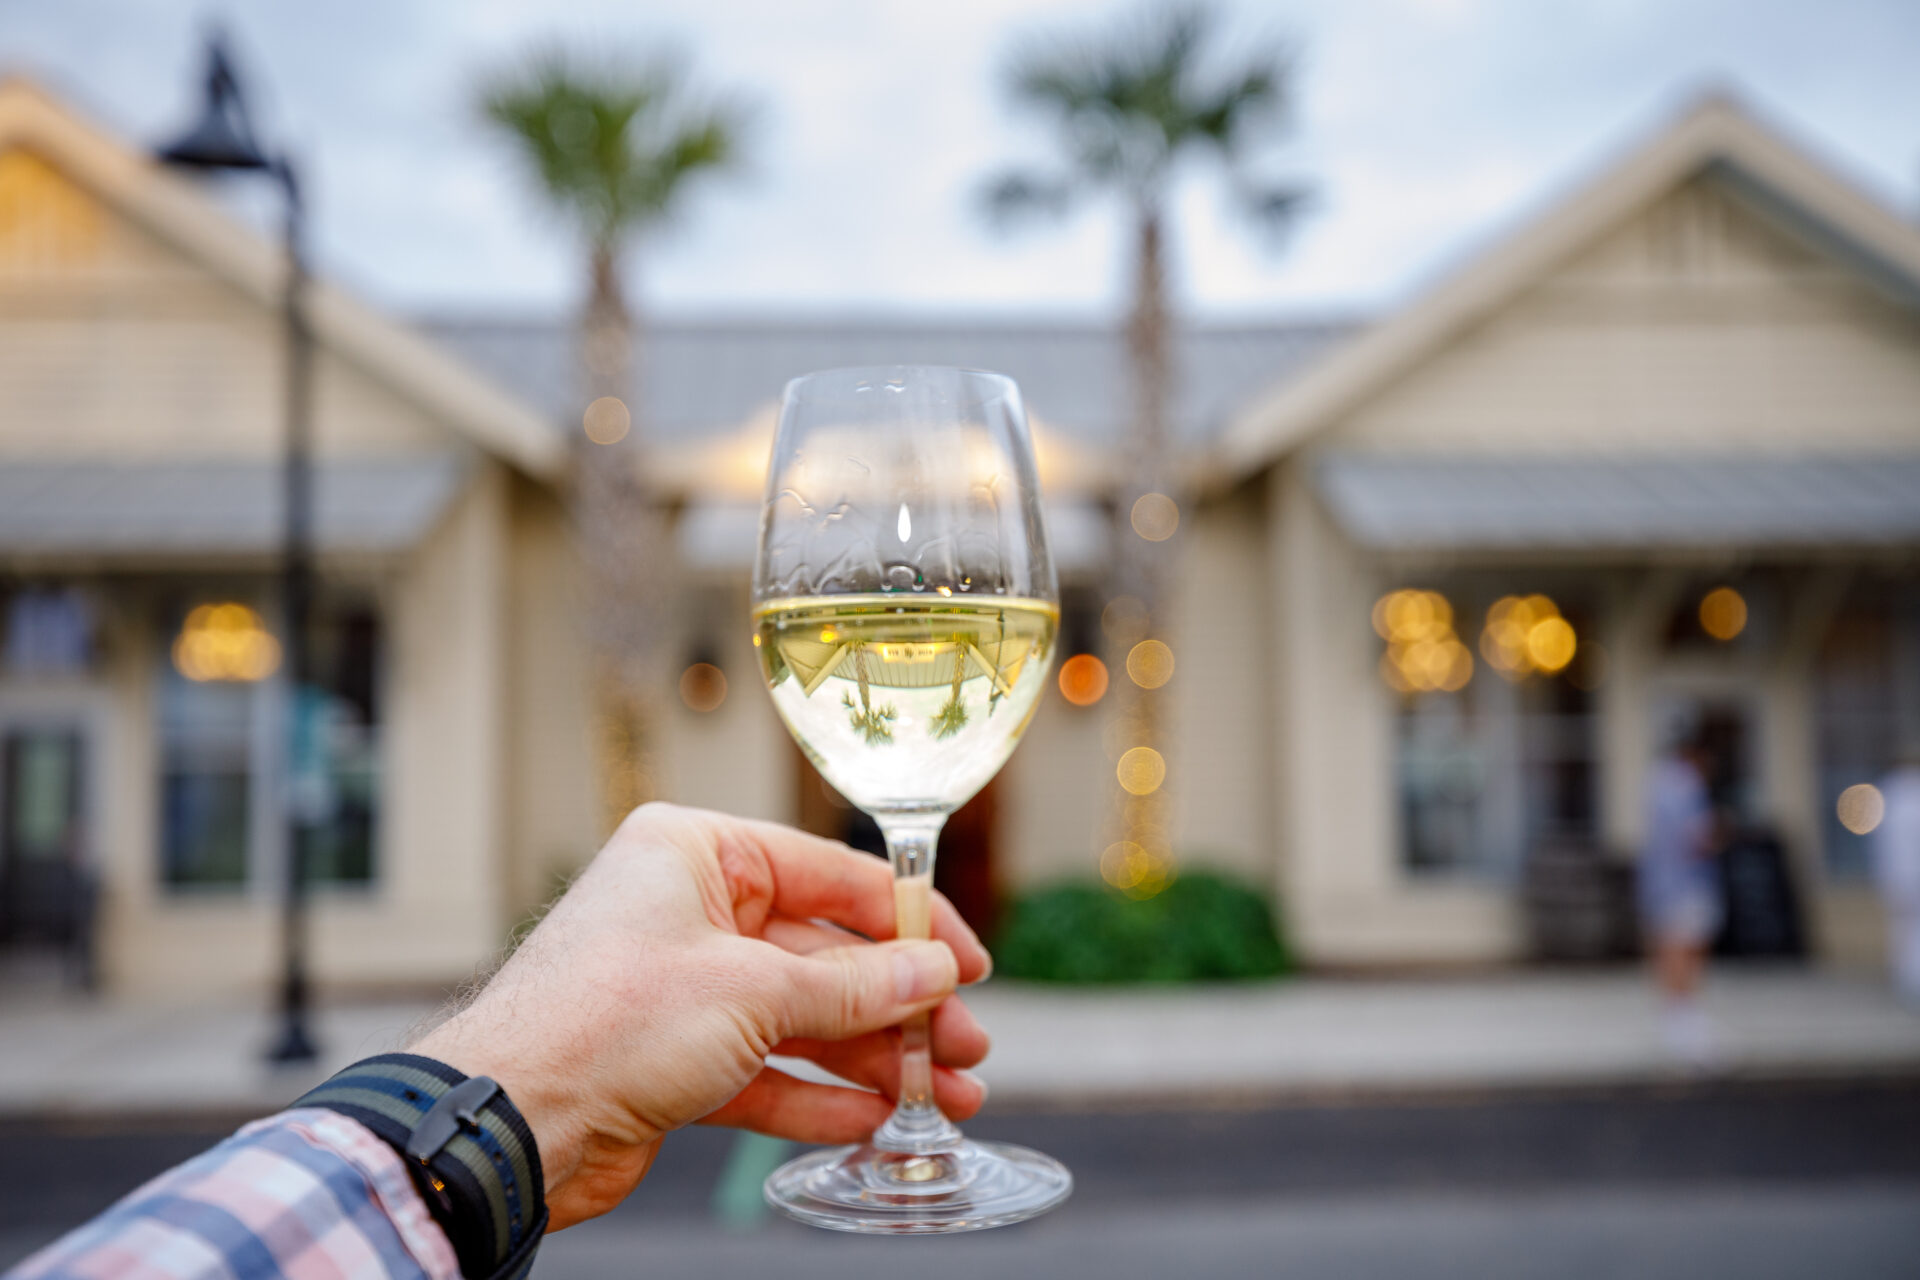 A glass of white wine held outside 48 Wine Bar on Johns Island, one of the sea islands